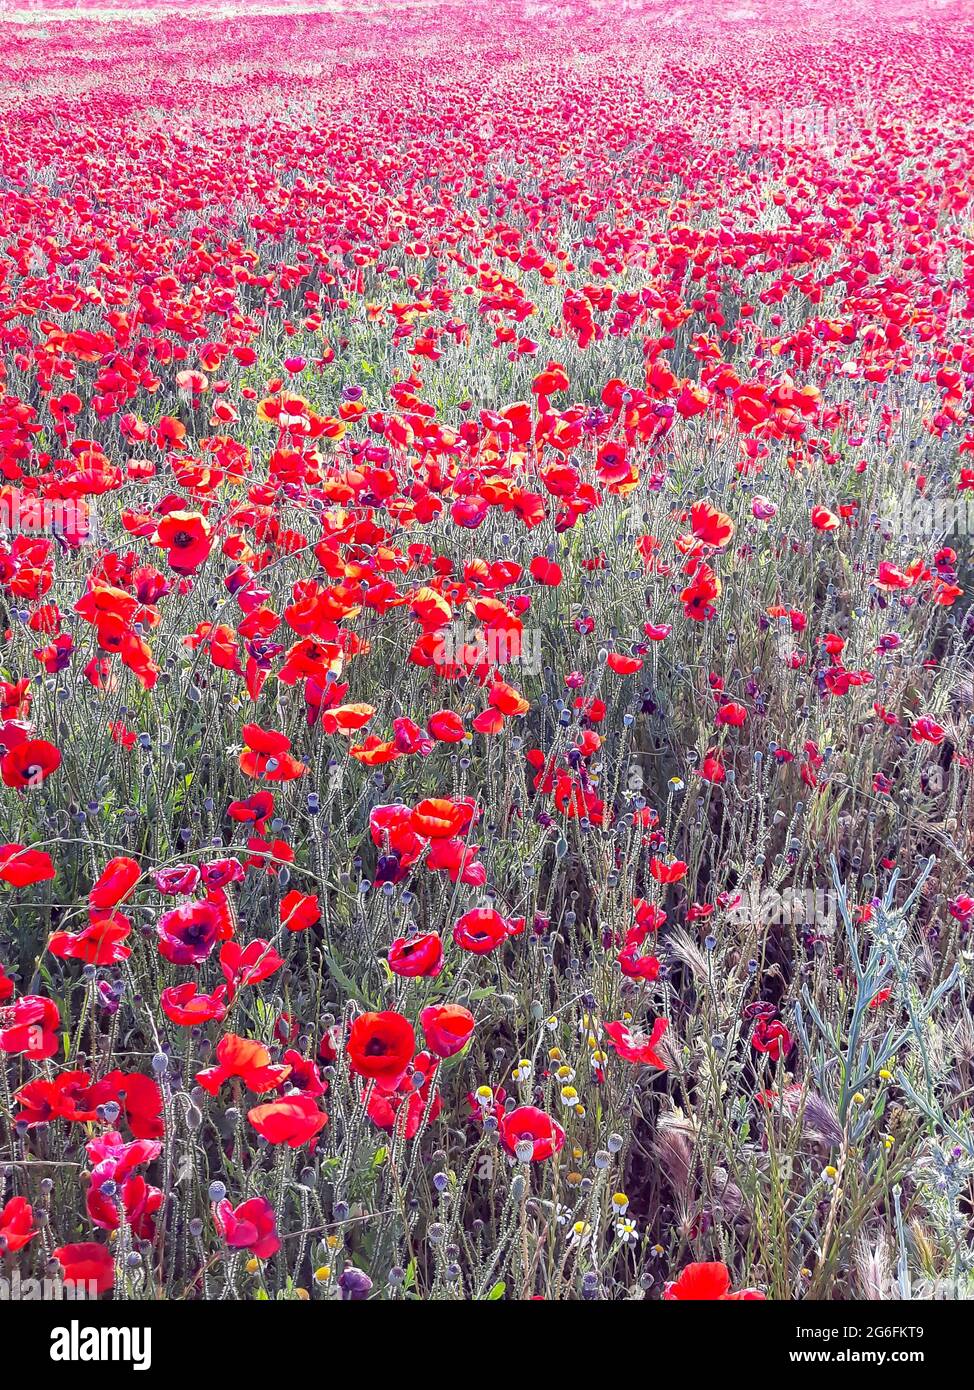 Field of red poppies Stock Photo